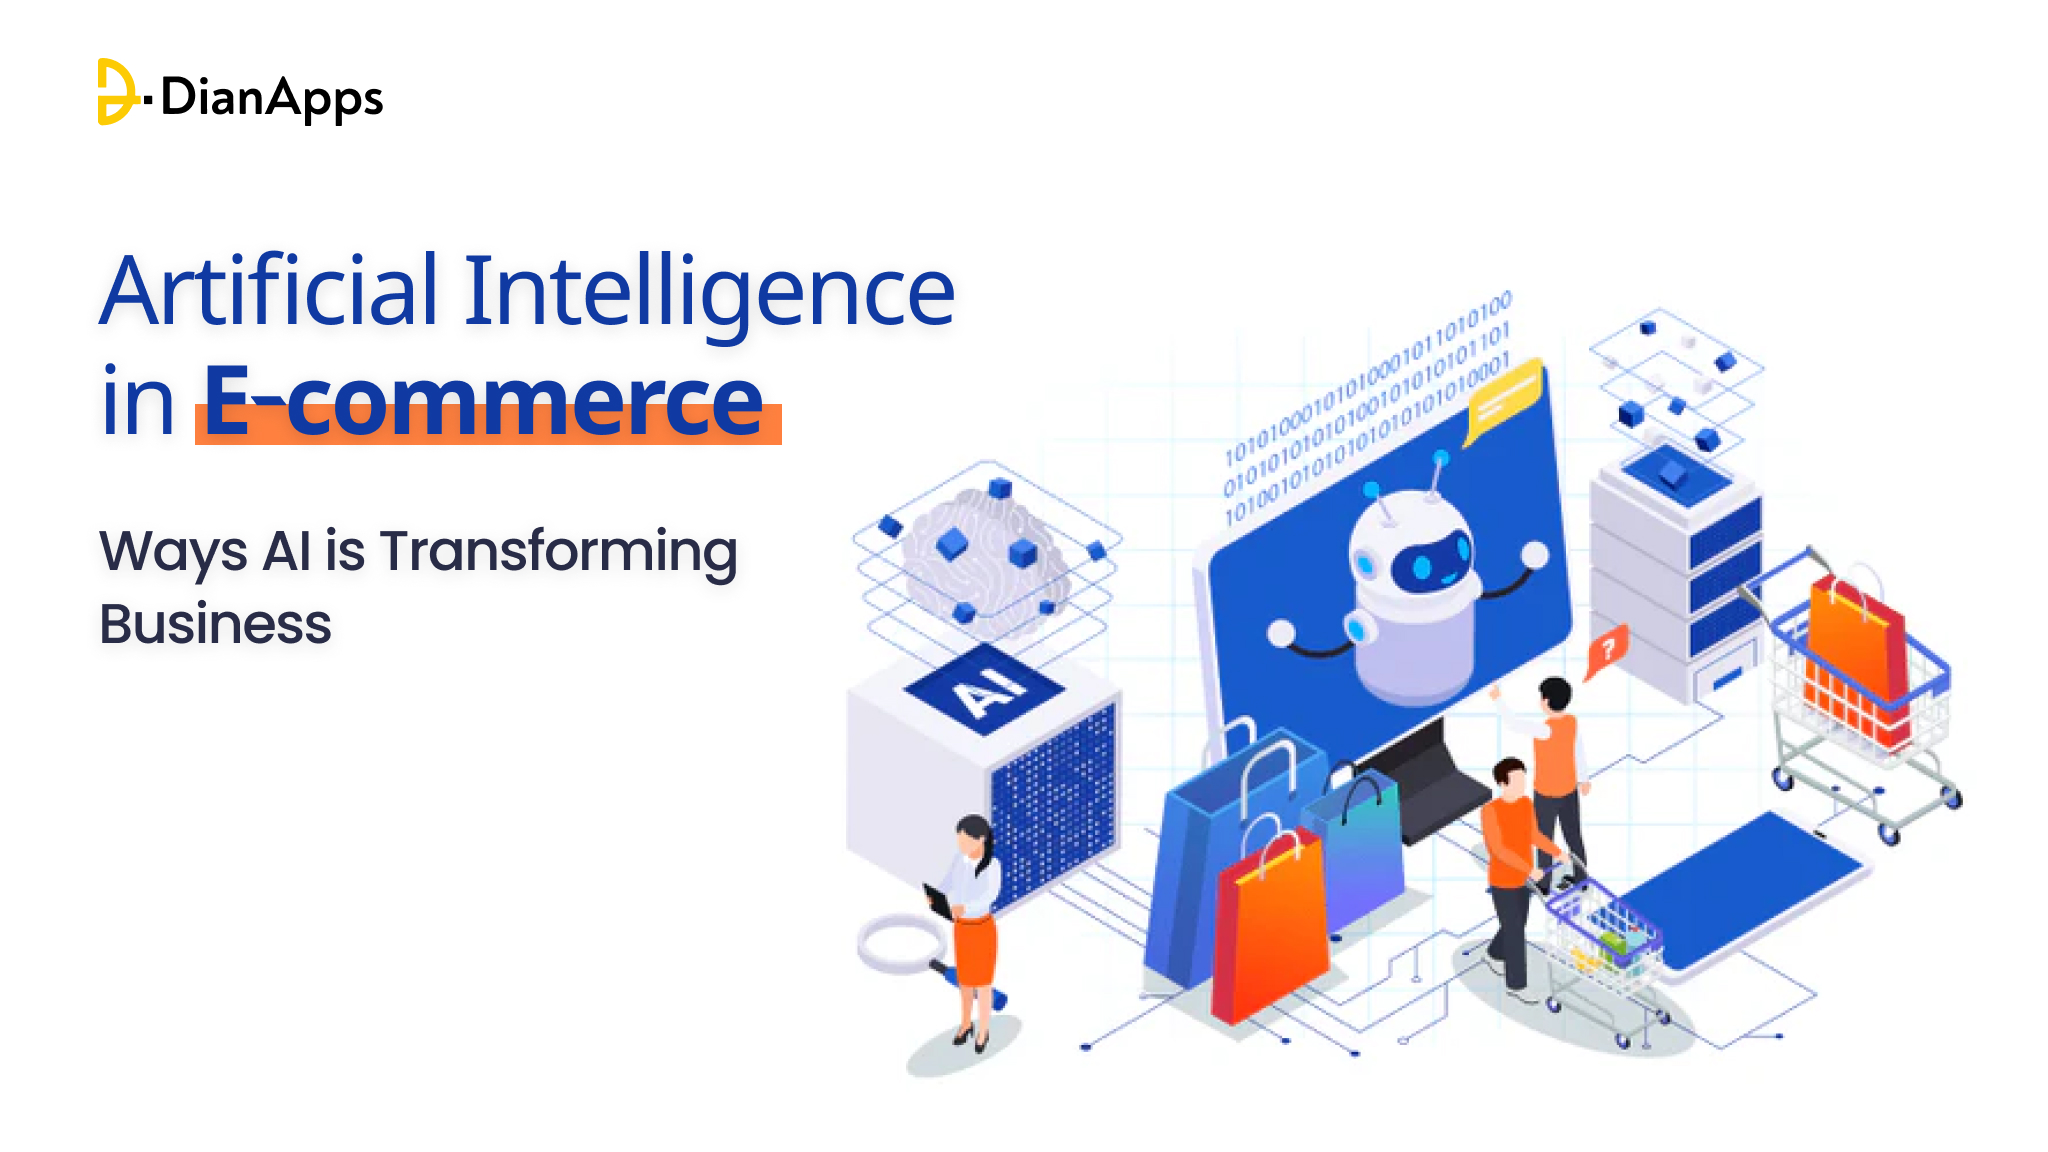 AI in eCommerce